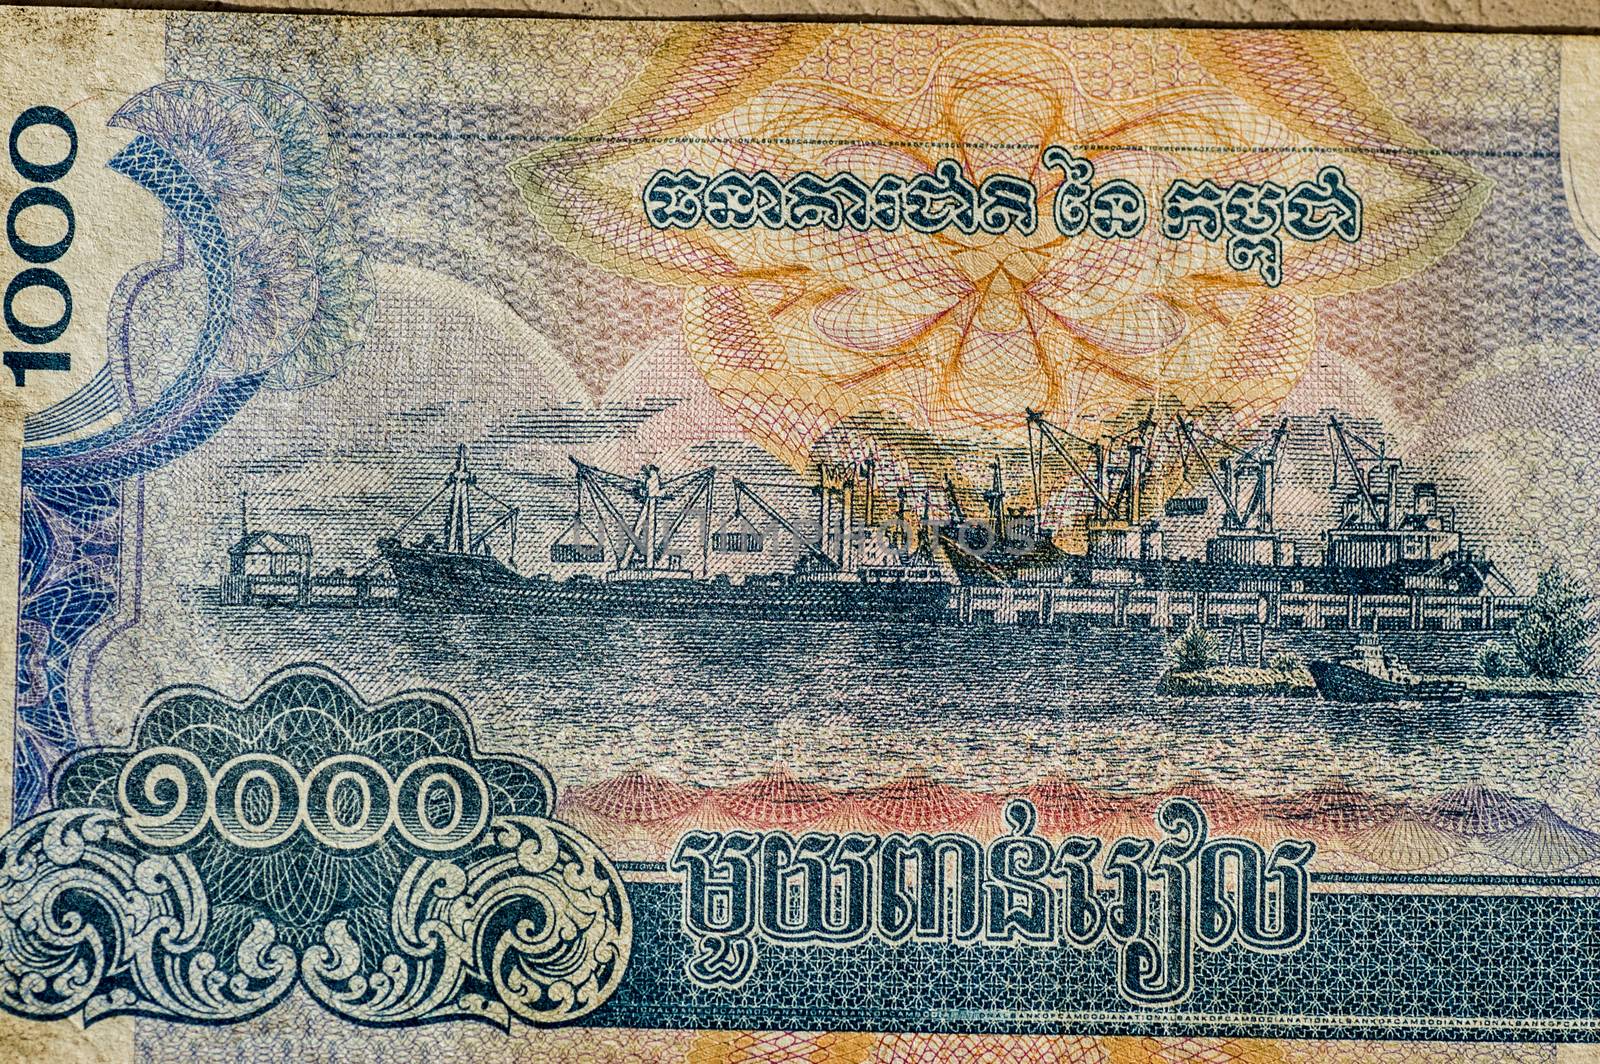 Ships being loaded at the Cambodian port of Sihanoukville (Kampong Saom). Used 1000 Riels banknote, photographed at an angle.